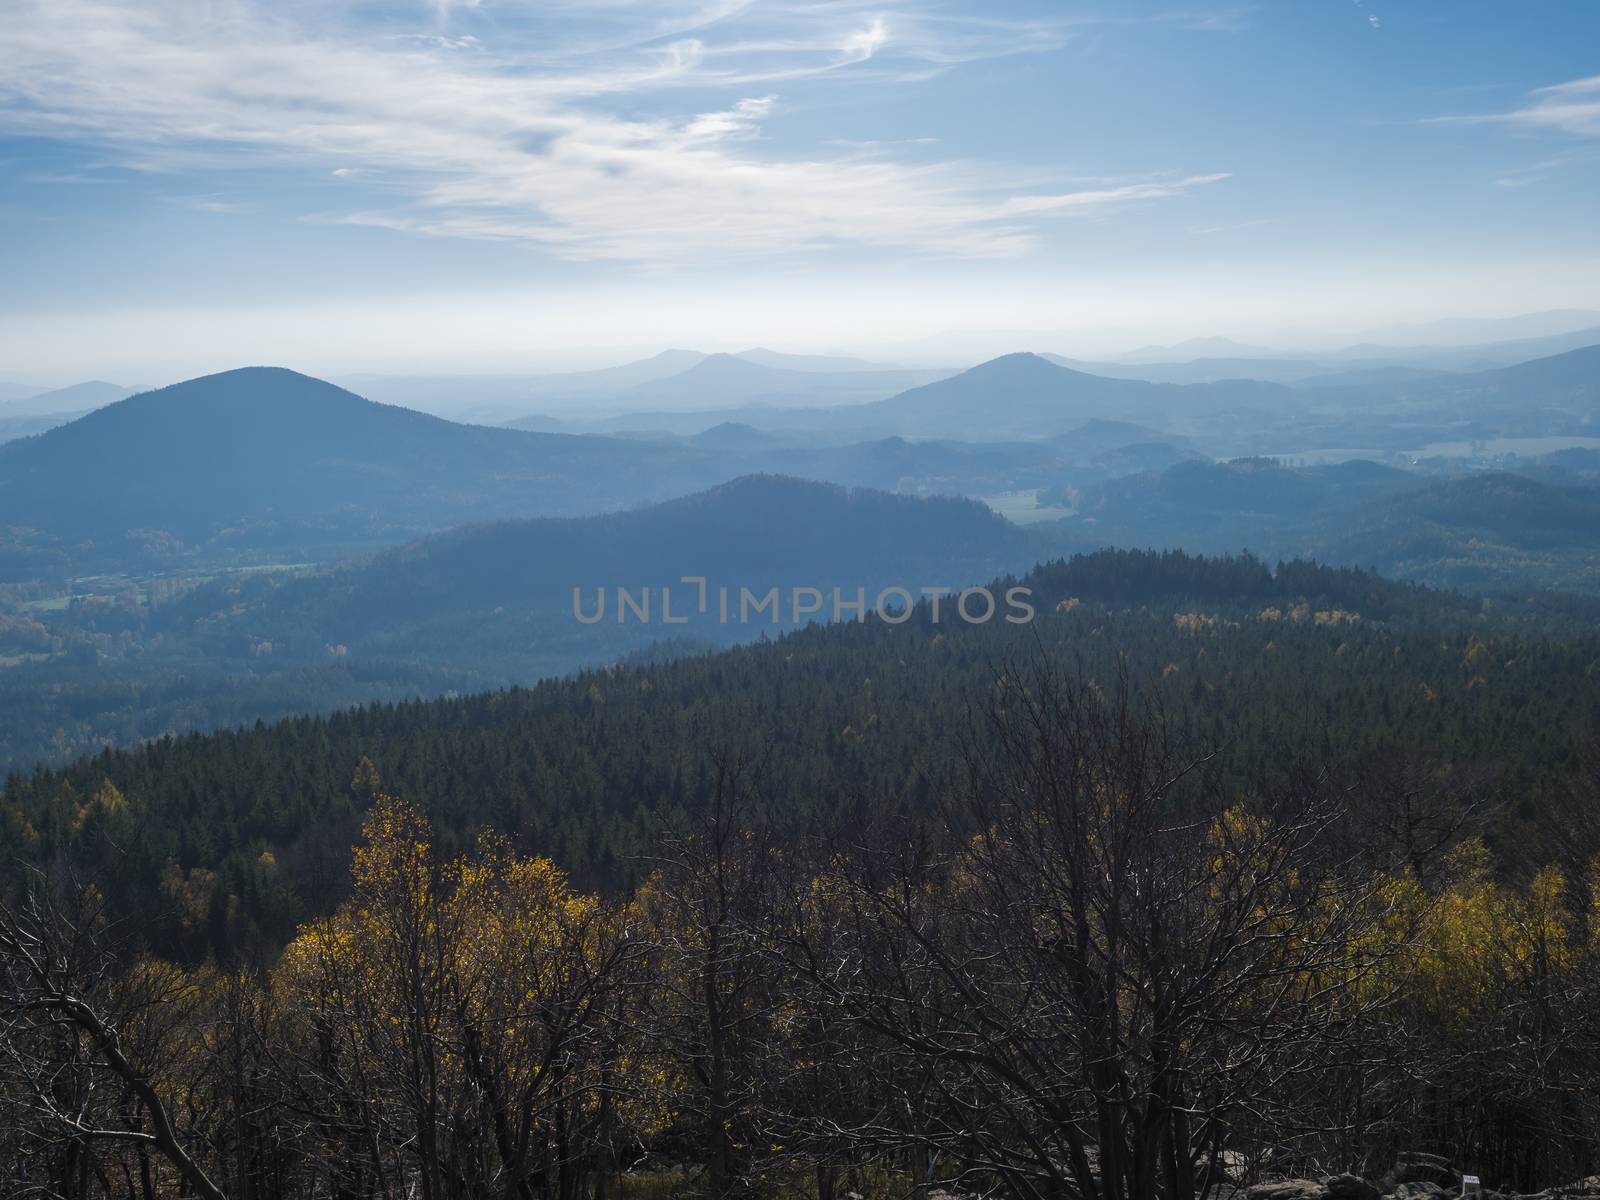 Luzicke hory panorama, view from Hochwald Hvozd, the most attractive view-points of the Lusatian Mountains with autumn colored deciduous and coniferous tree forest and green hills, golden hour light.